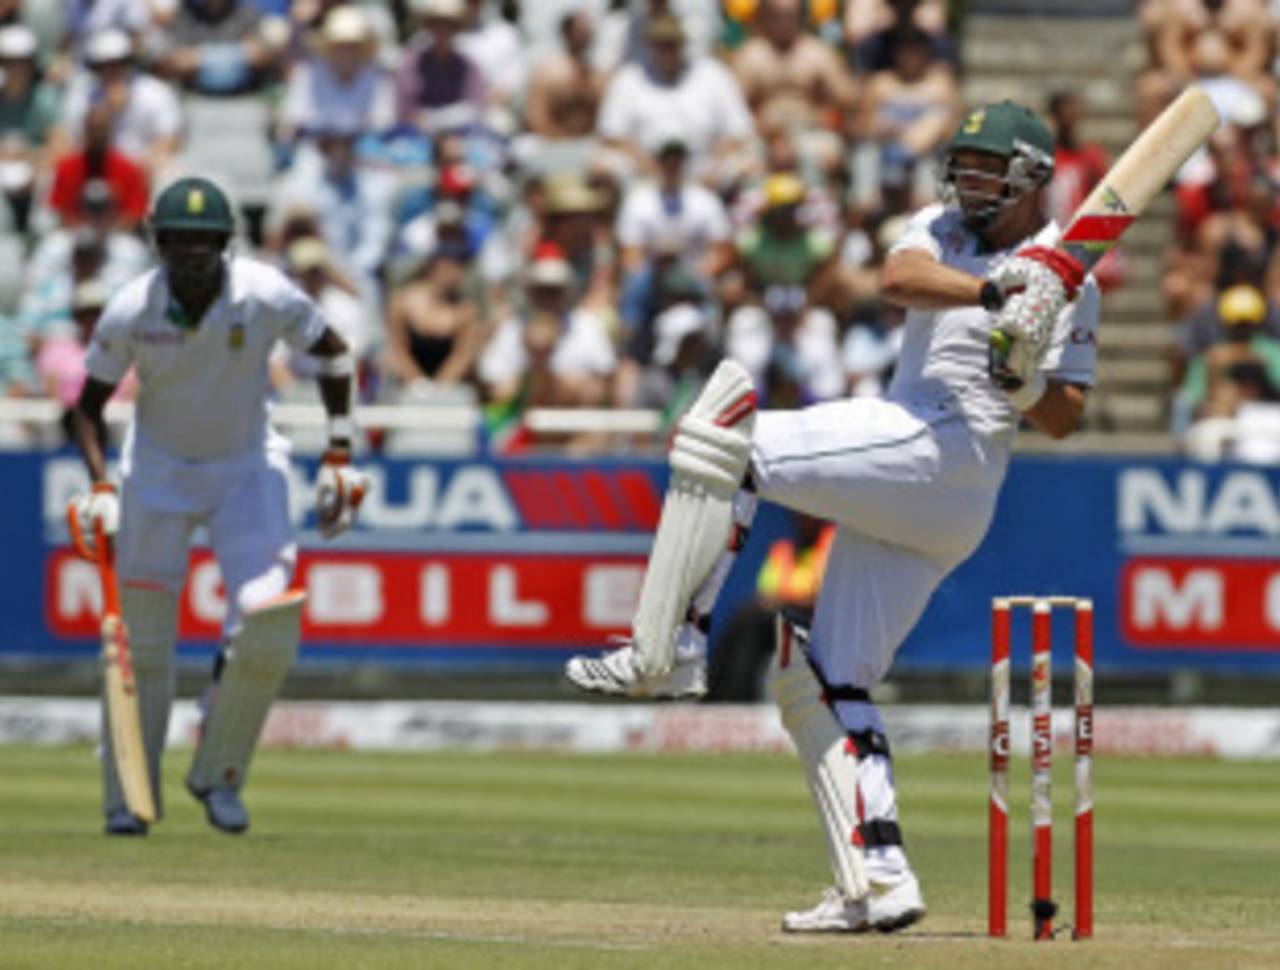 Jacques Kallis plays one of his many pull shots through a packed leg-side field, South Africa v India, 3rd Test, Cape Town, 2nd day, January 3, 2011